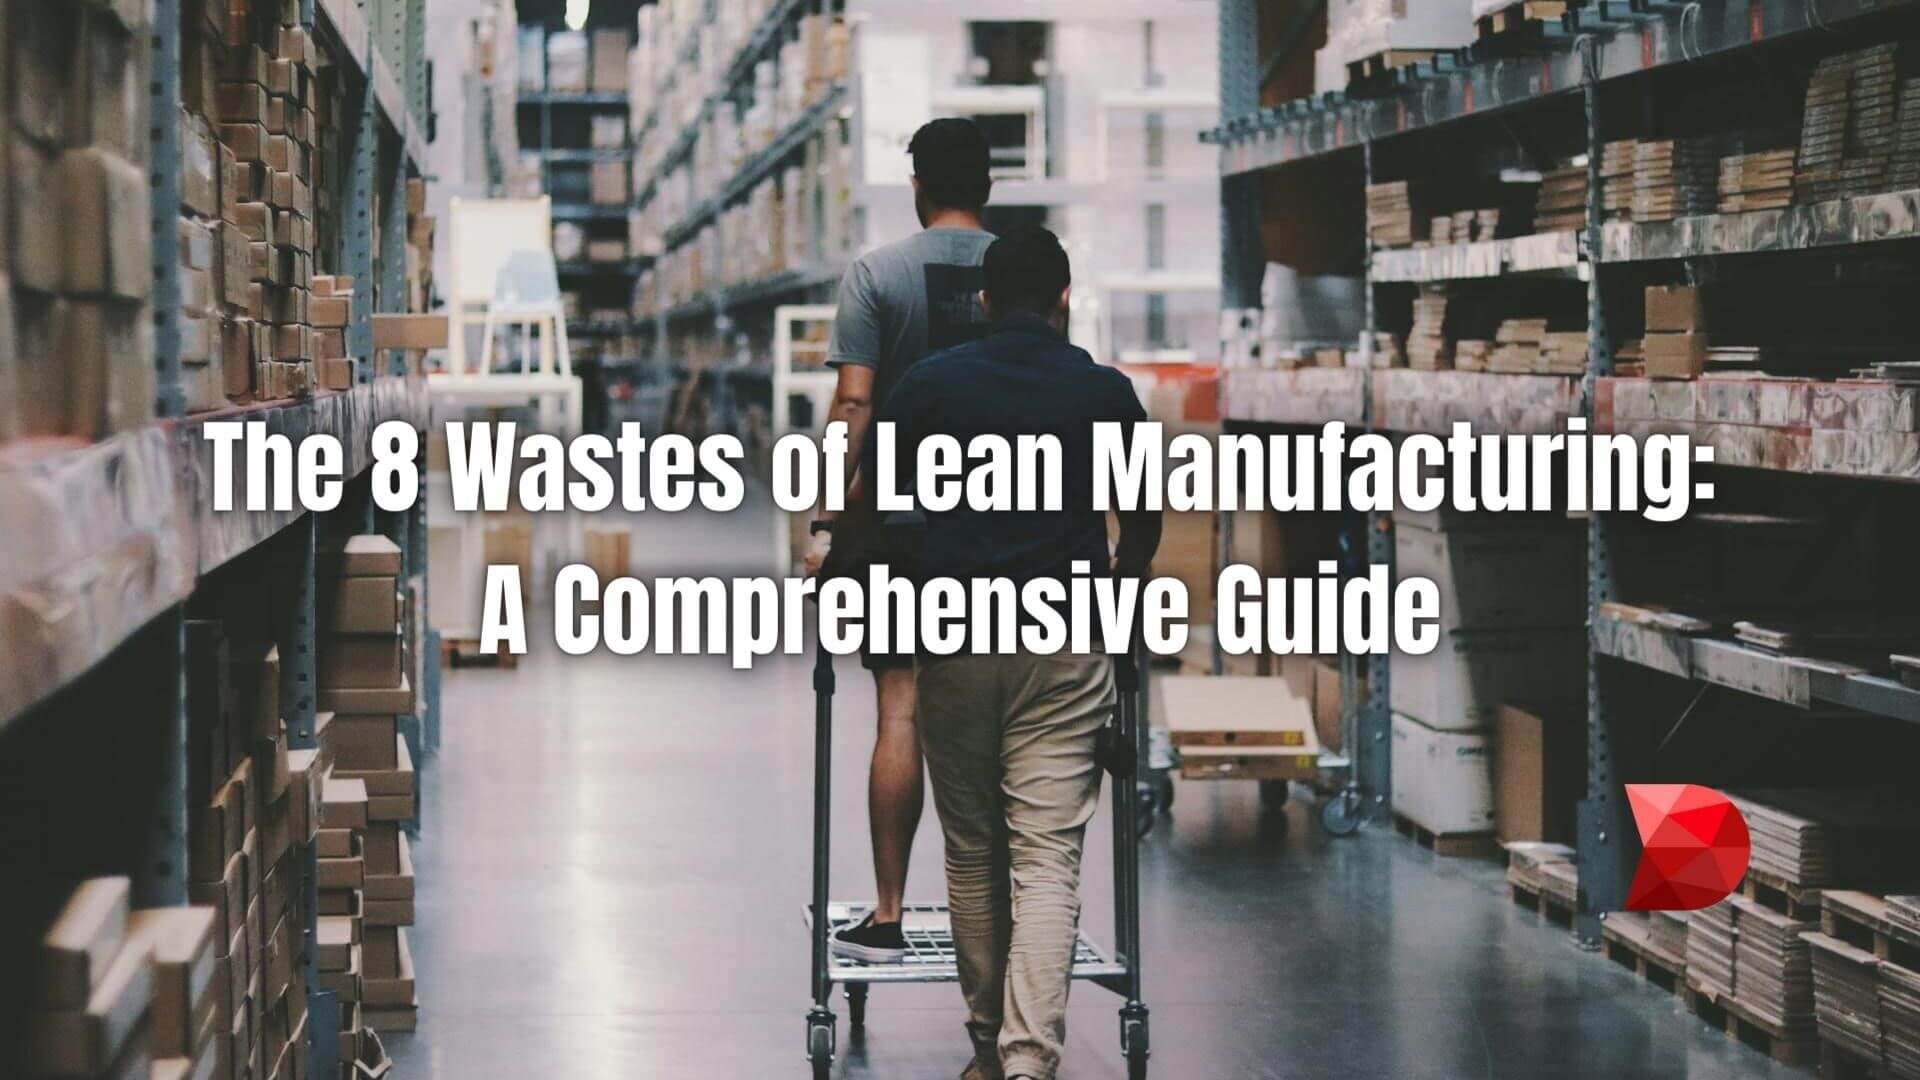 Transform your operations with our guide to the 8 wastes of lean manufacturing. Learn how to eliminate waste and drive sustainable growth.